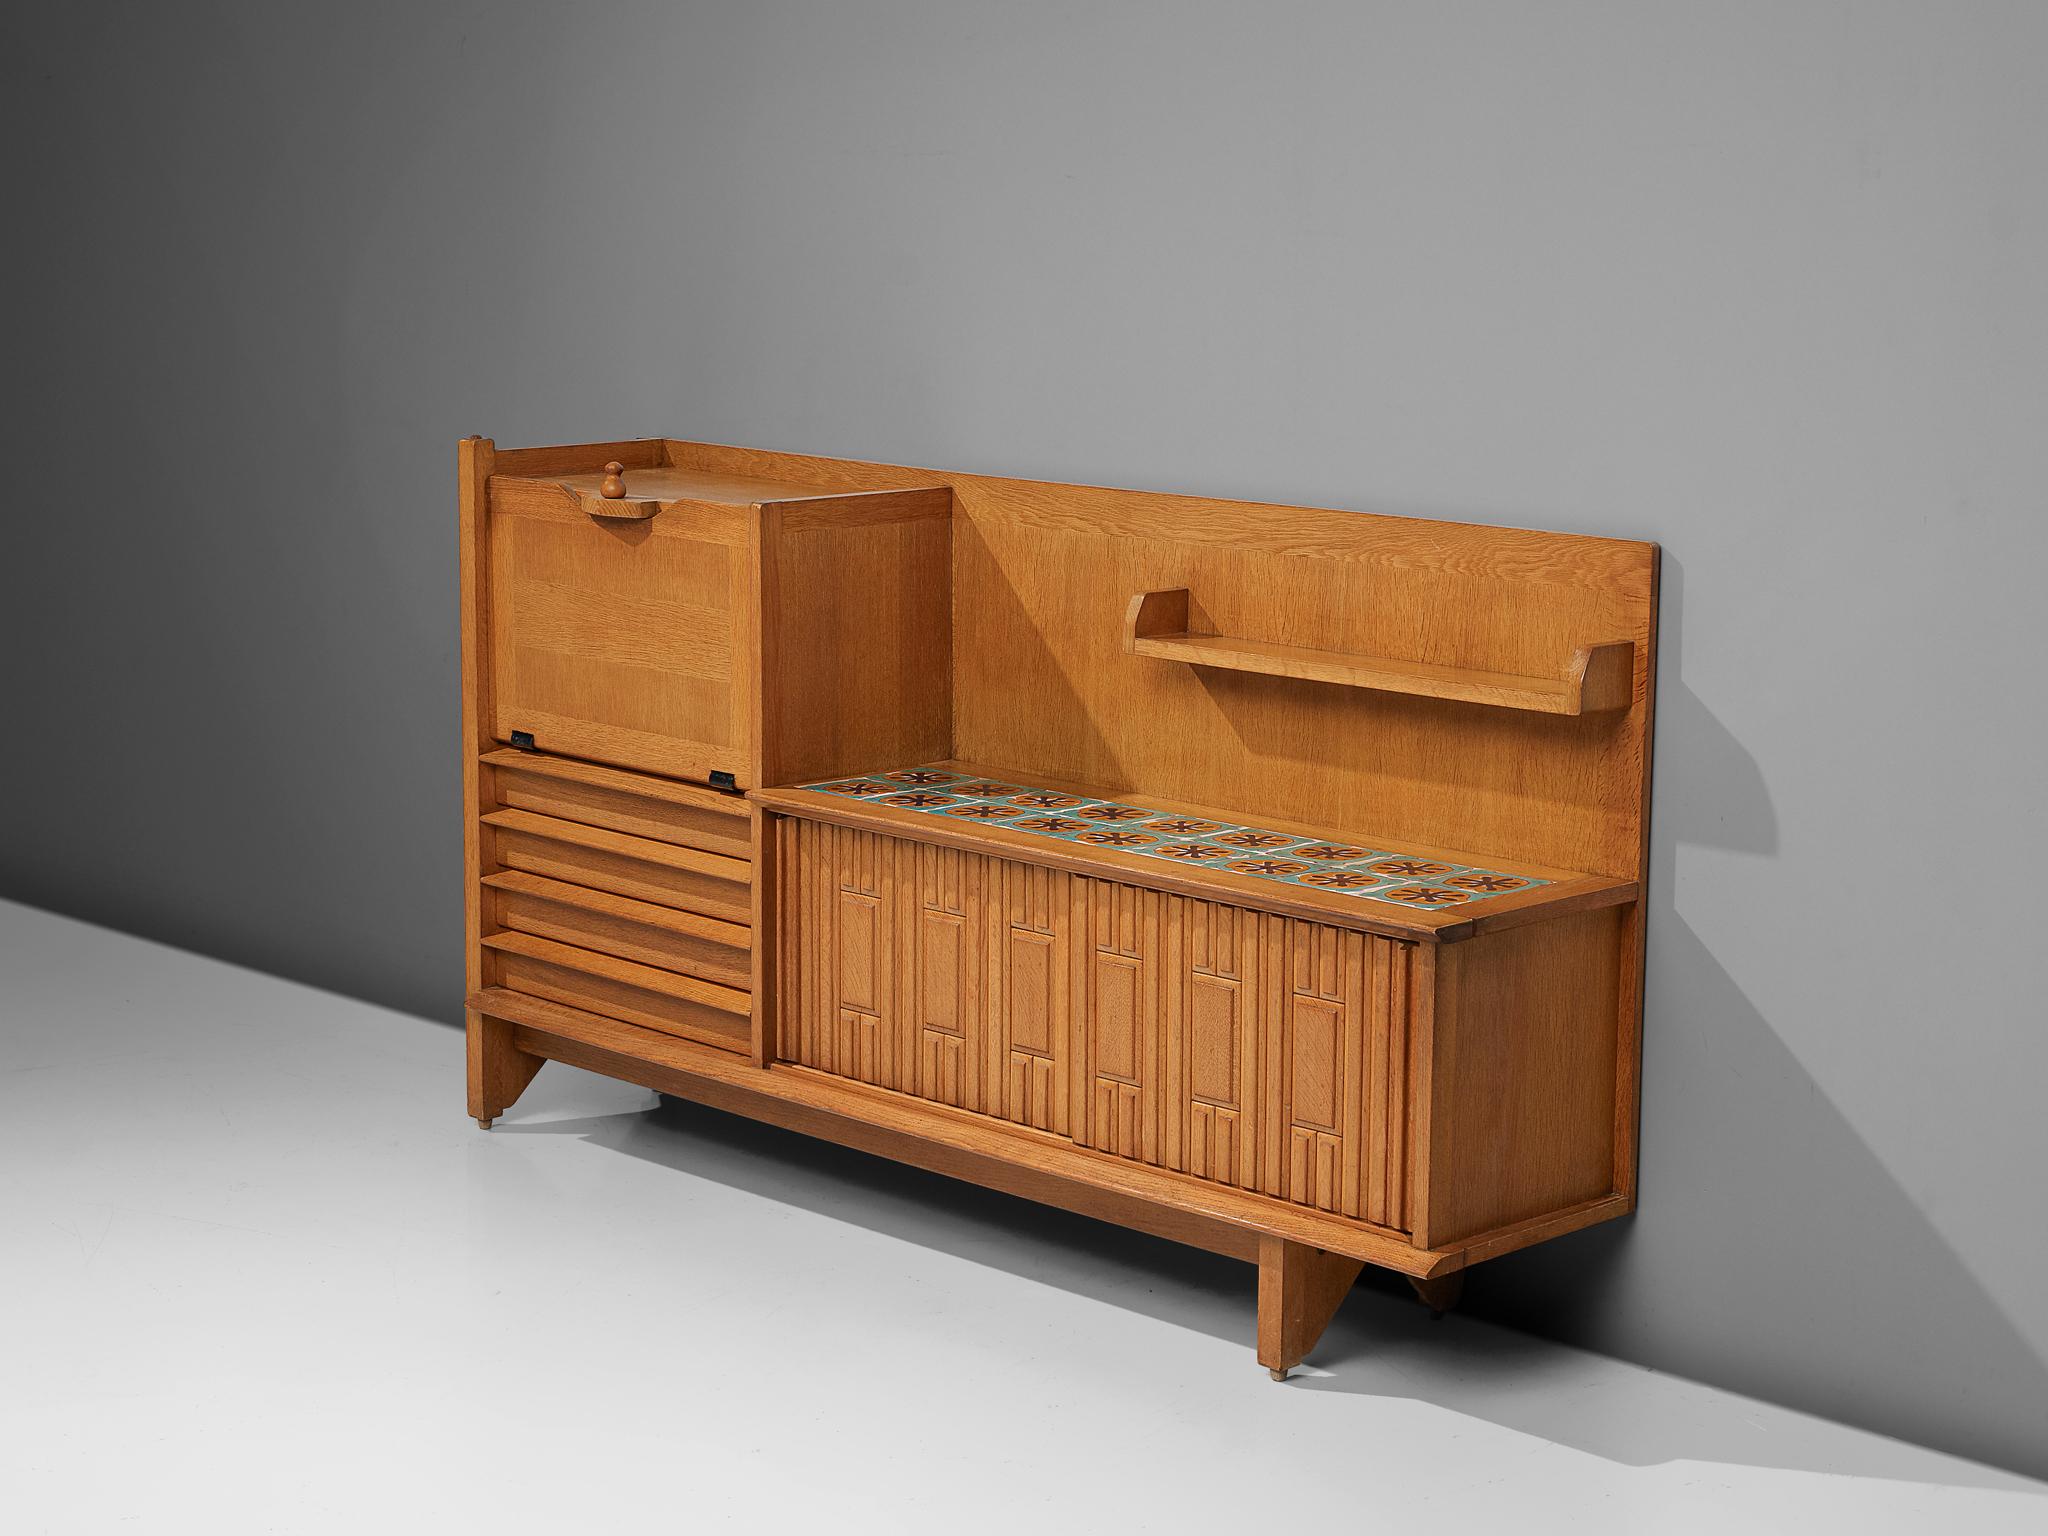 Guillerme et Chambron, buffet, oak and ceramic, France, 1960s

This characteristic cabinet in solid oak is designed by the French designer duo Jacques Chambron (1914-2001) and Robert Guillerme (1913-1990). It features two sliding front doors, one